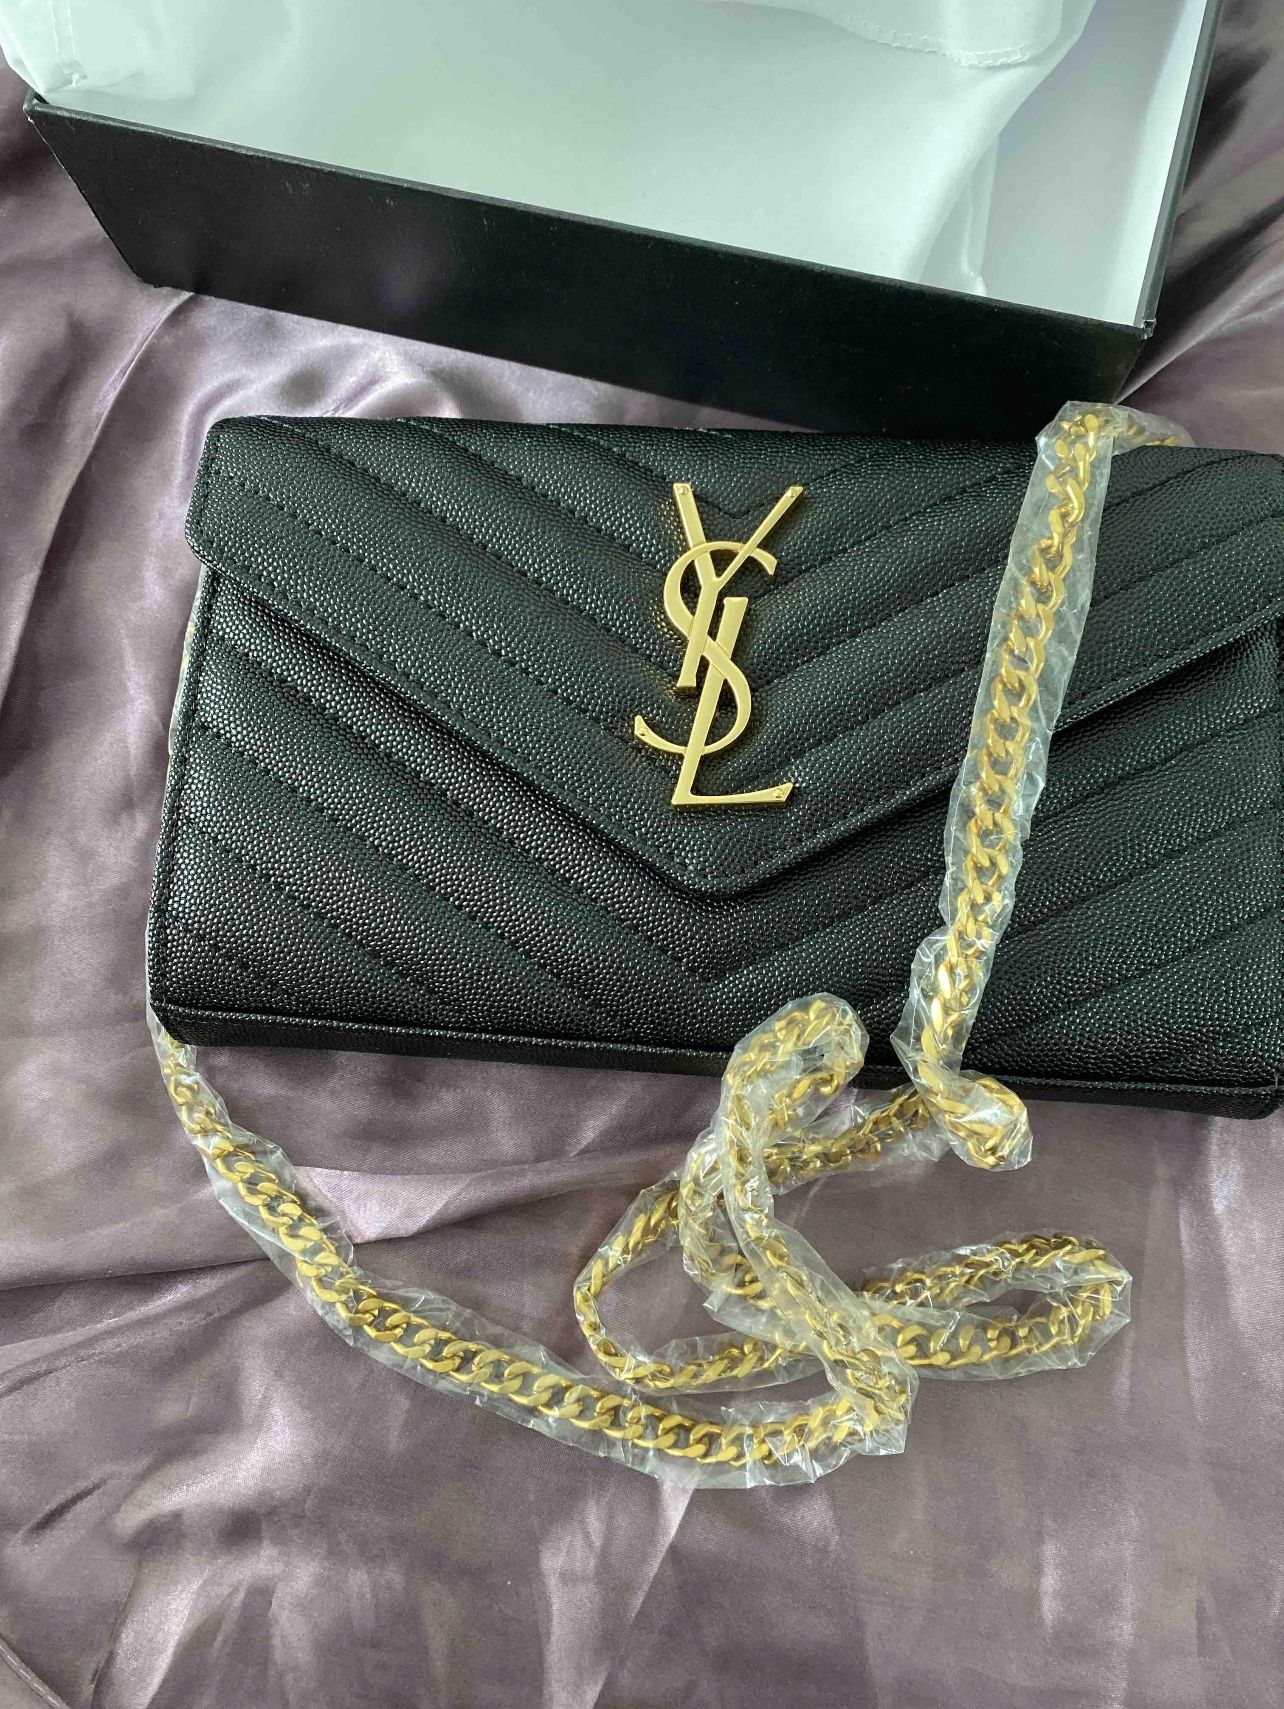 YSL Purse - Open To Negotiate - Need gone